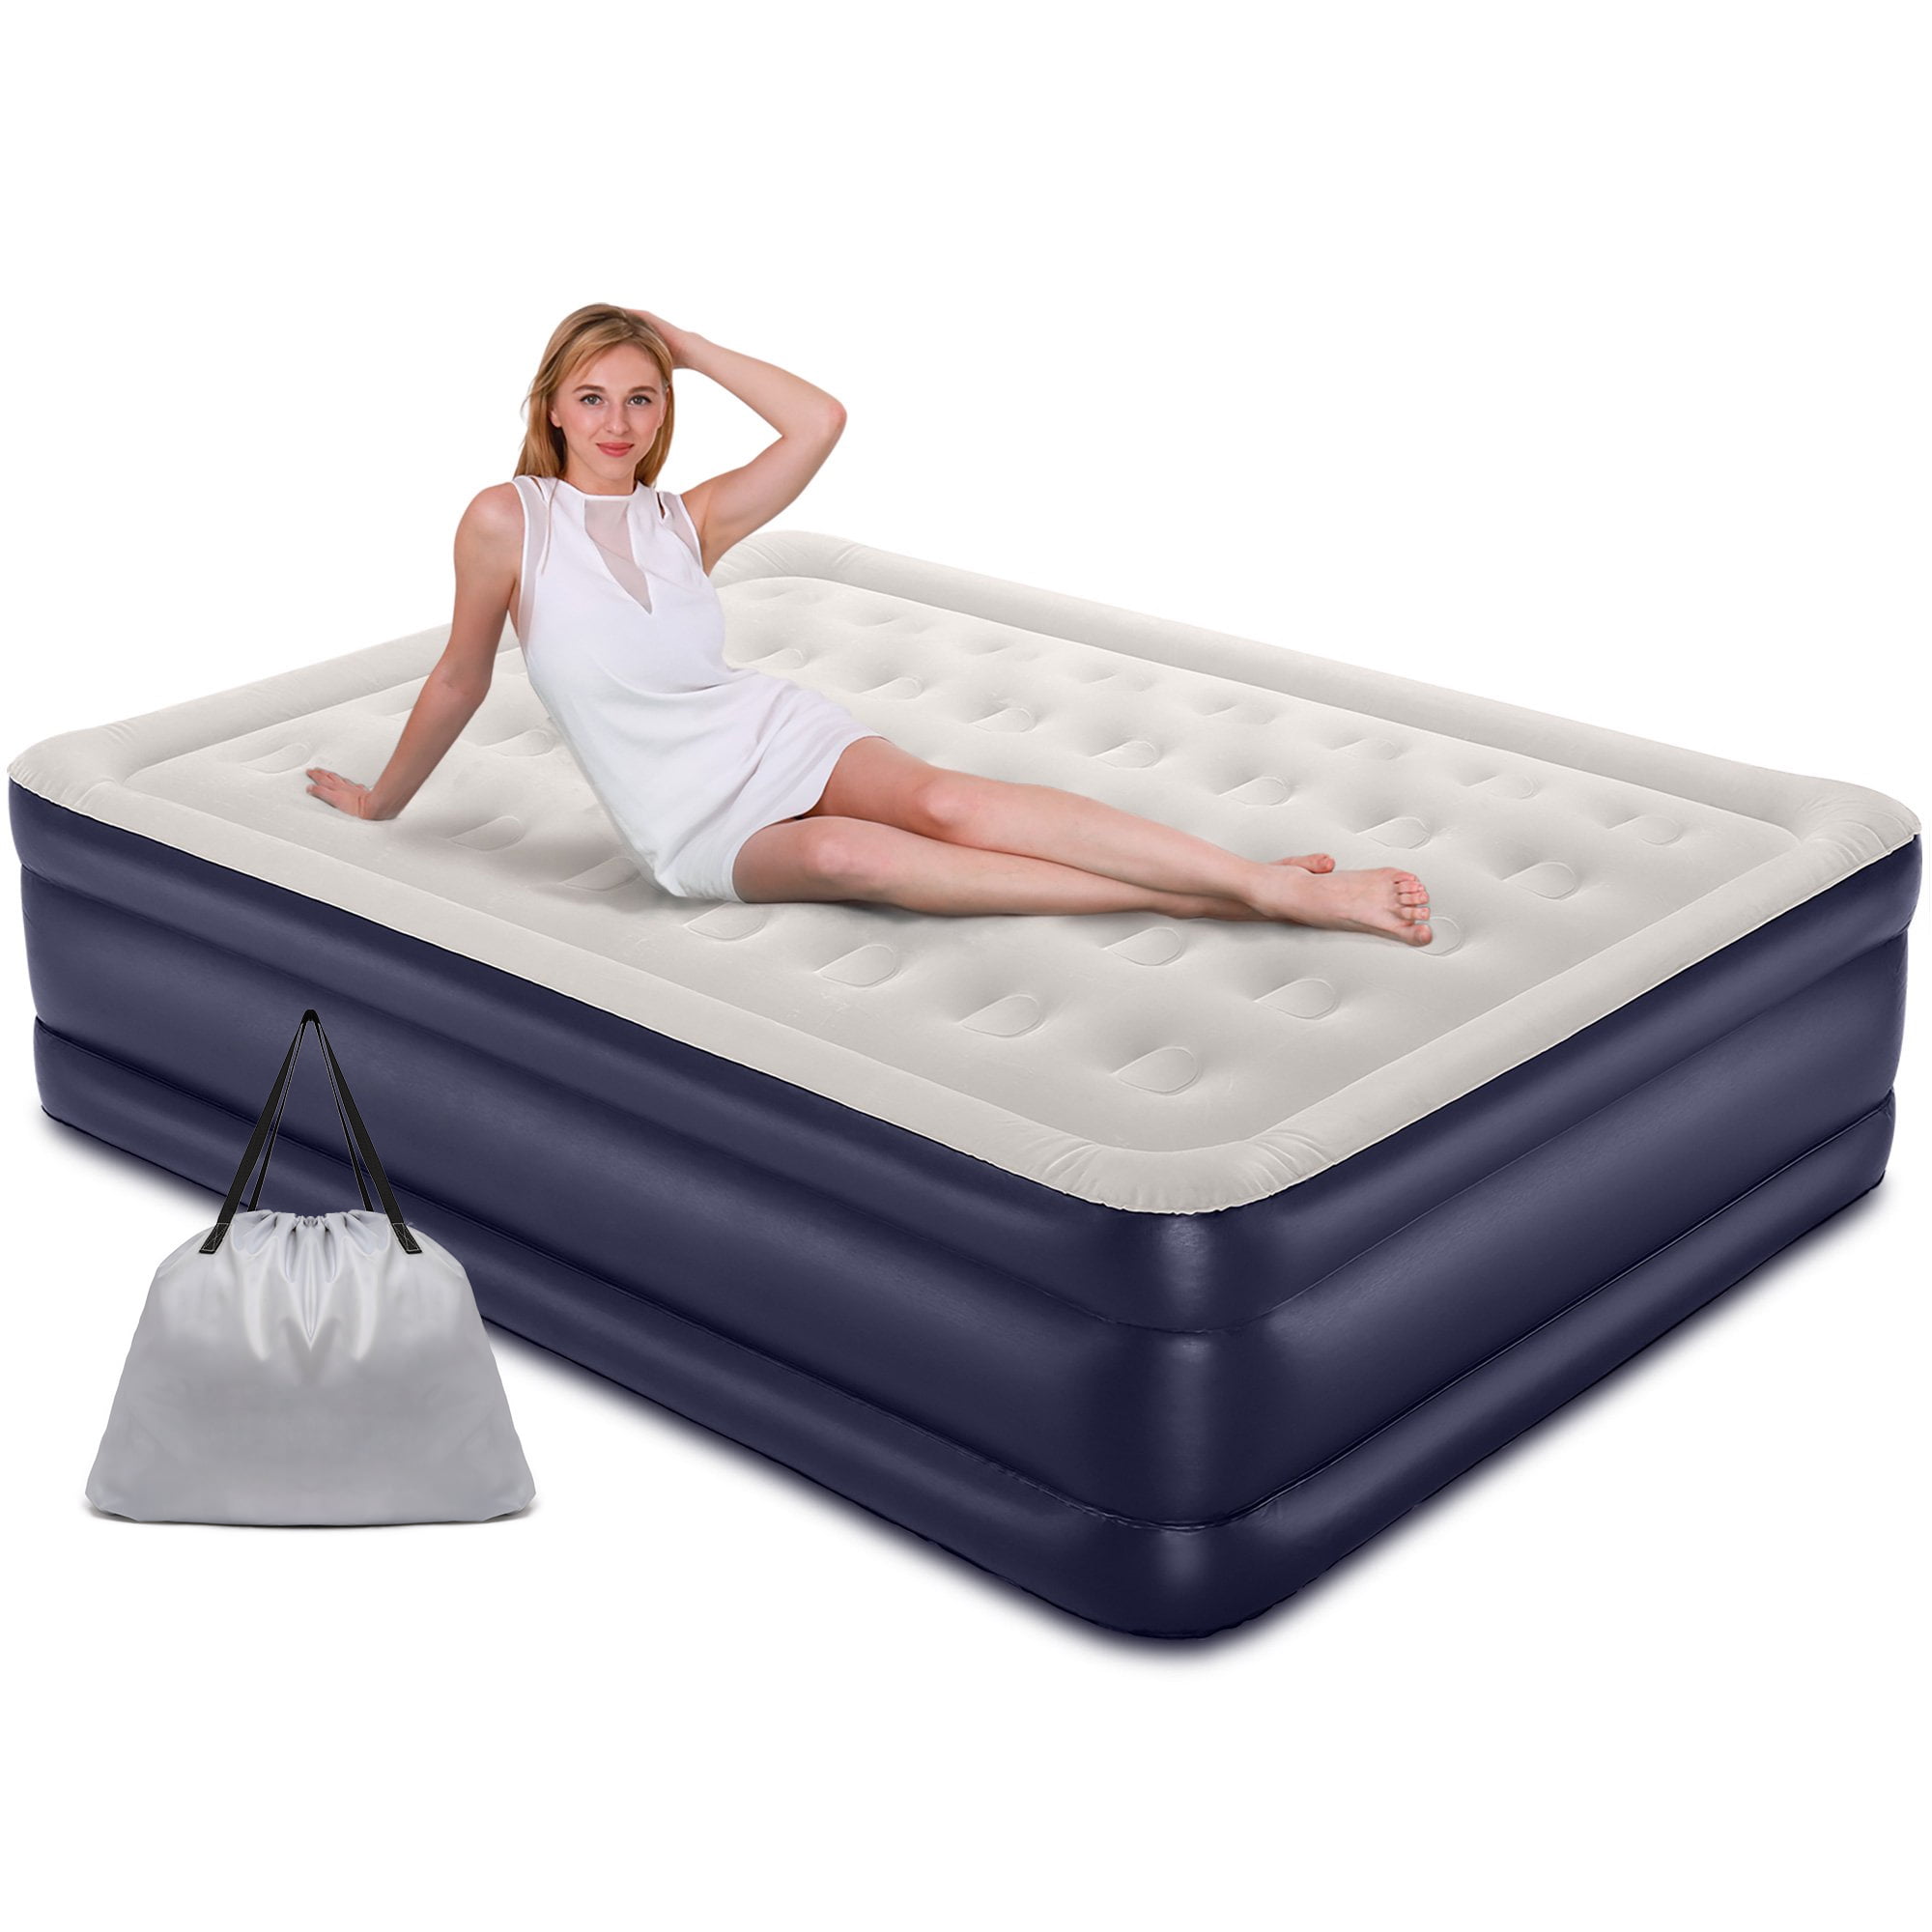 QUEEN INFLATABLE HIGH RAISED AIR BED MATTRES AIRBED W BUILT IN ELECTRIC PUMP NEW 